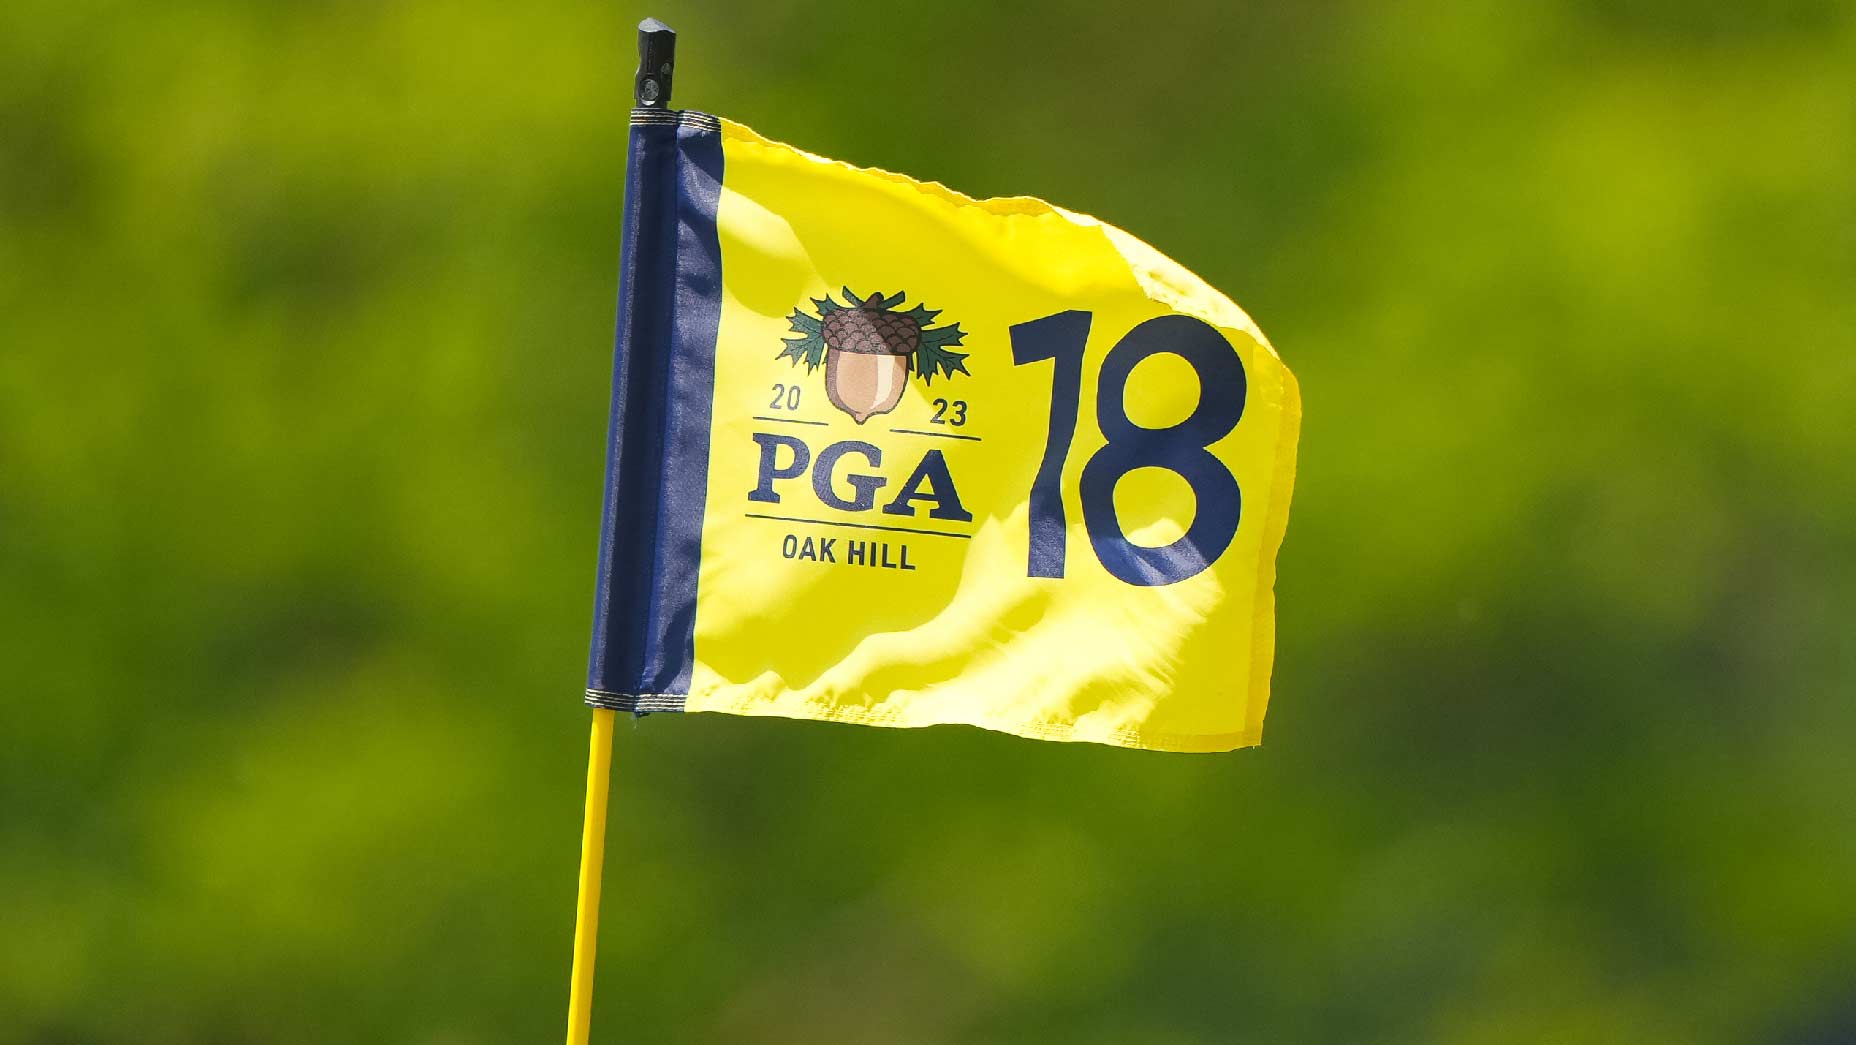 PGA Championship Sunday channel: How to watch Round 4 at Oak Hill